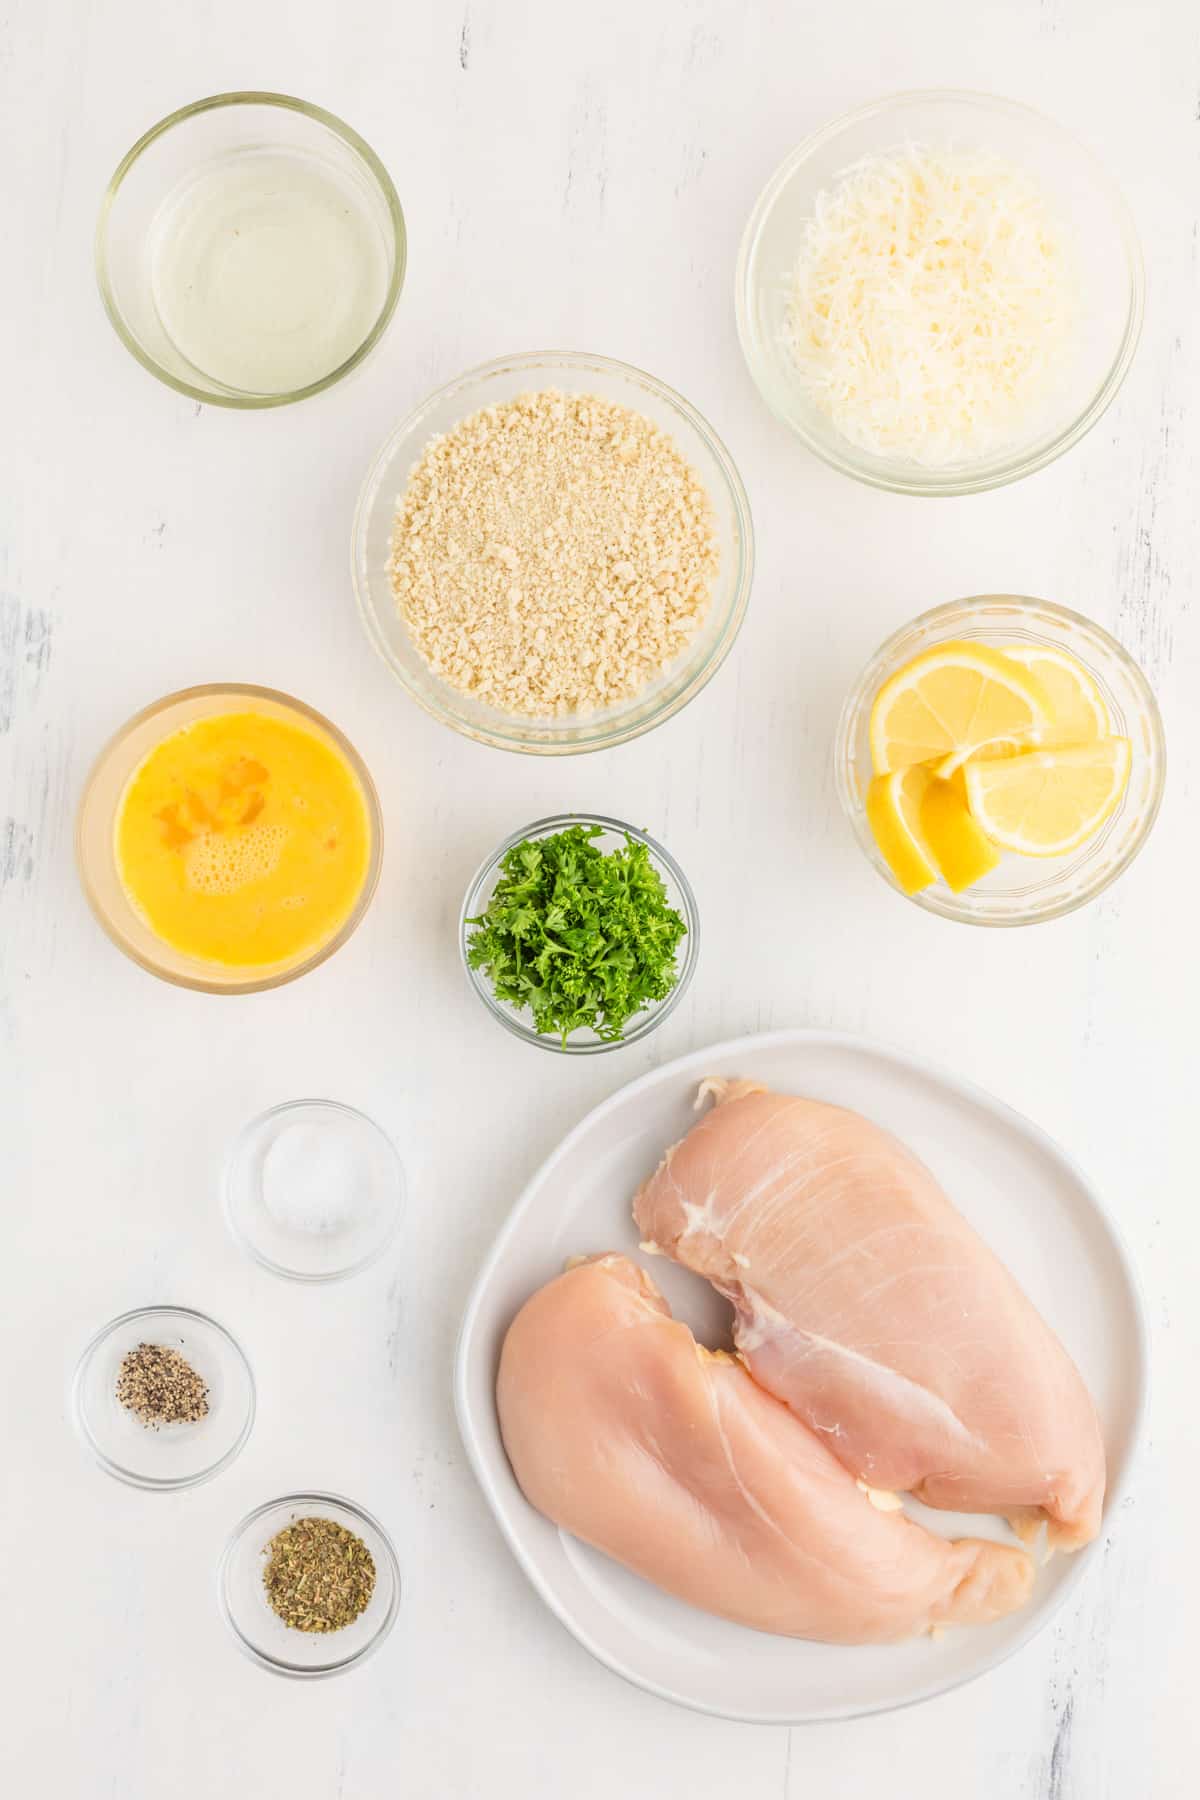 Step by step photos on how to make Parmesan Crusted Chicken.